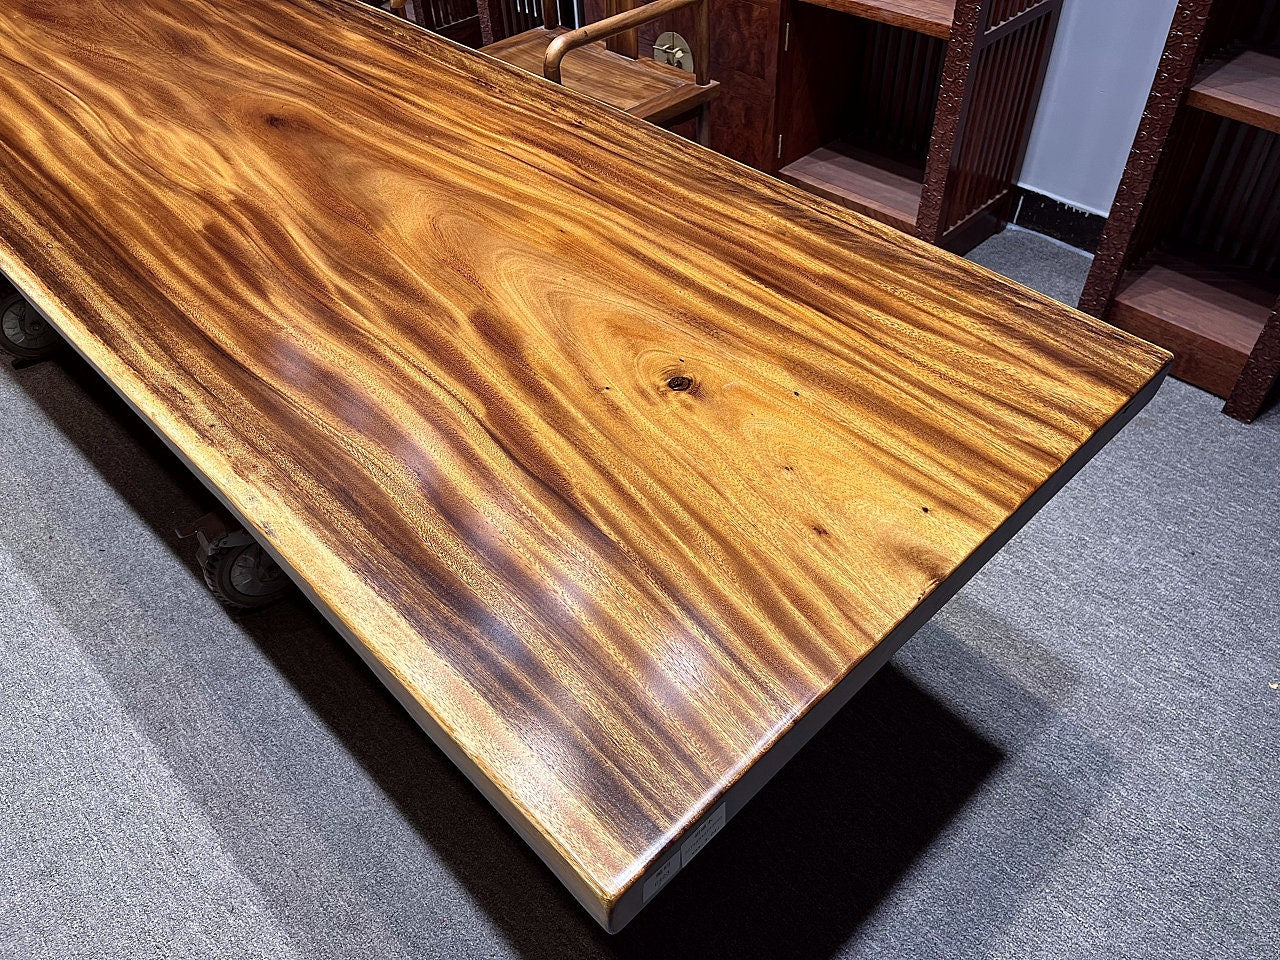 Solid wood table, Live Edge Table, Live Edge Furniture, Walnut Dining Table, Live Edge Dining Table